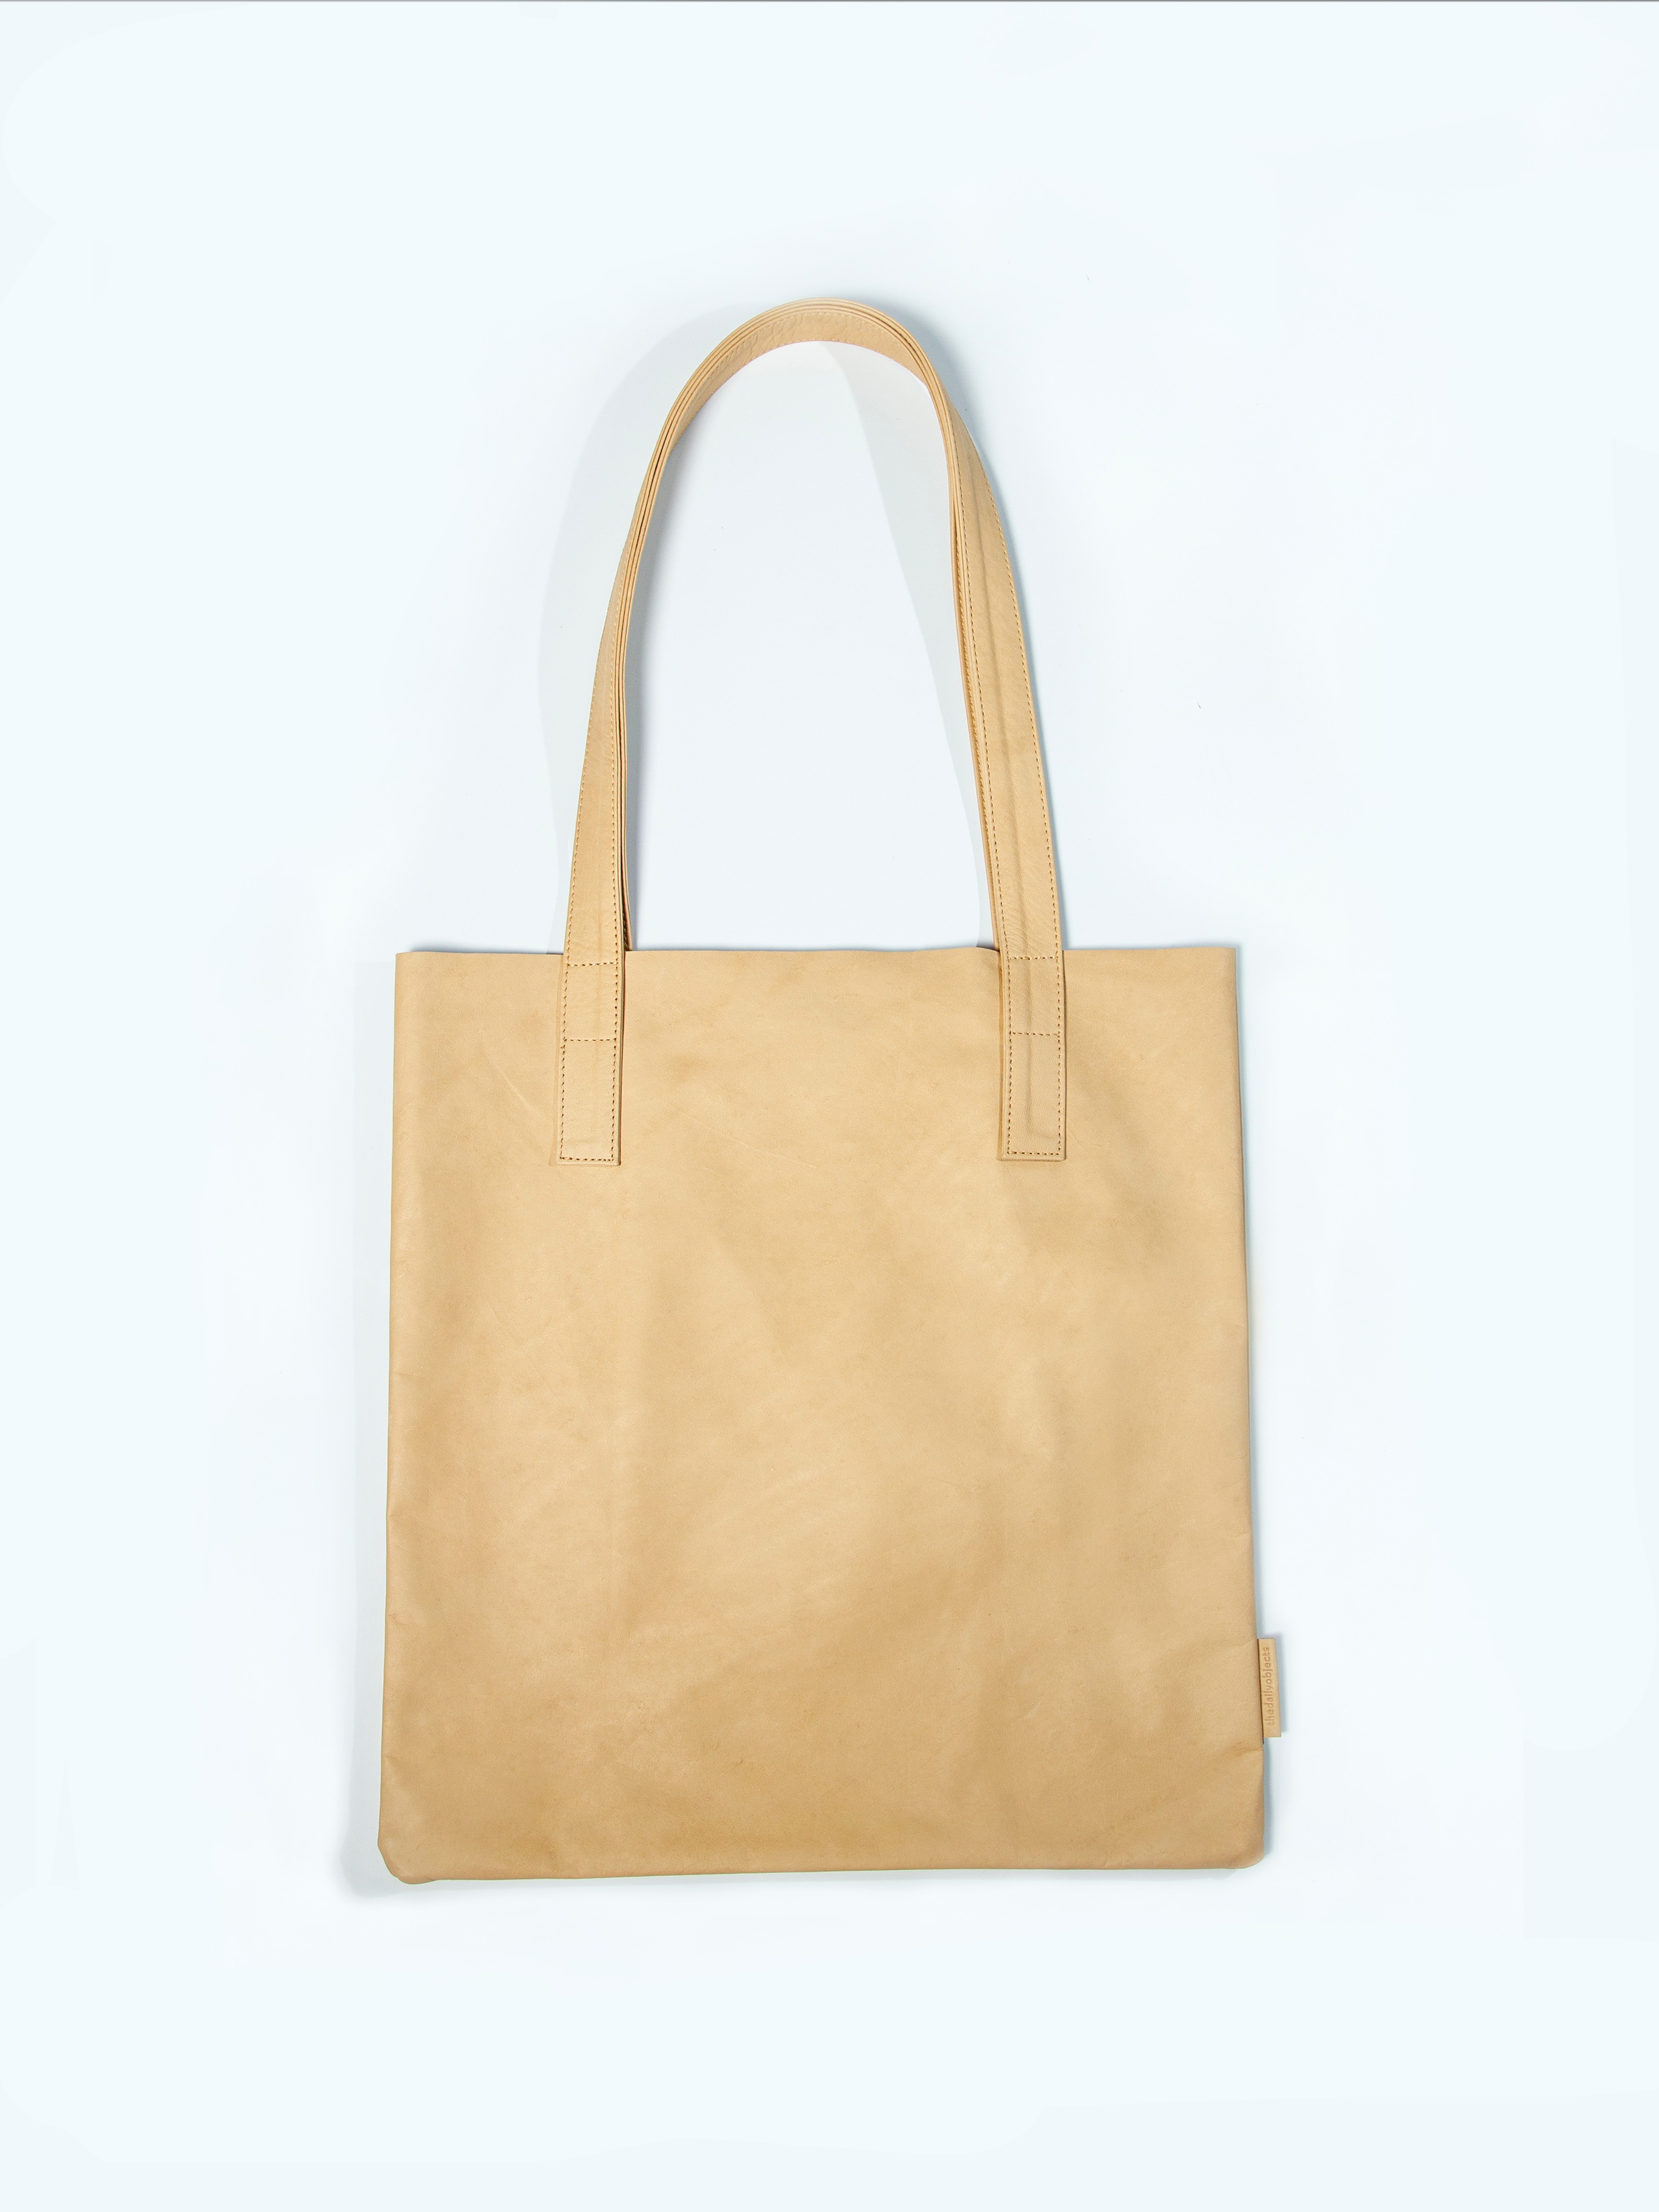 thedailyobjects - the classic tote: beige